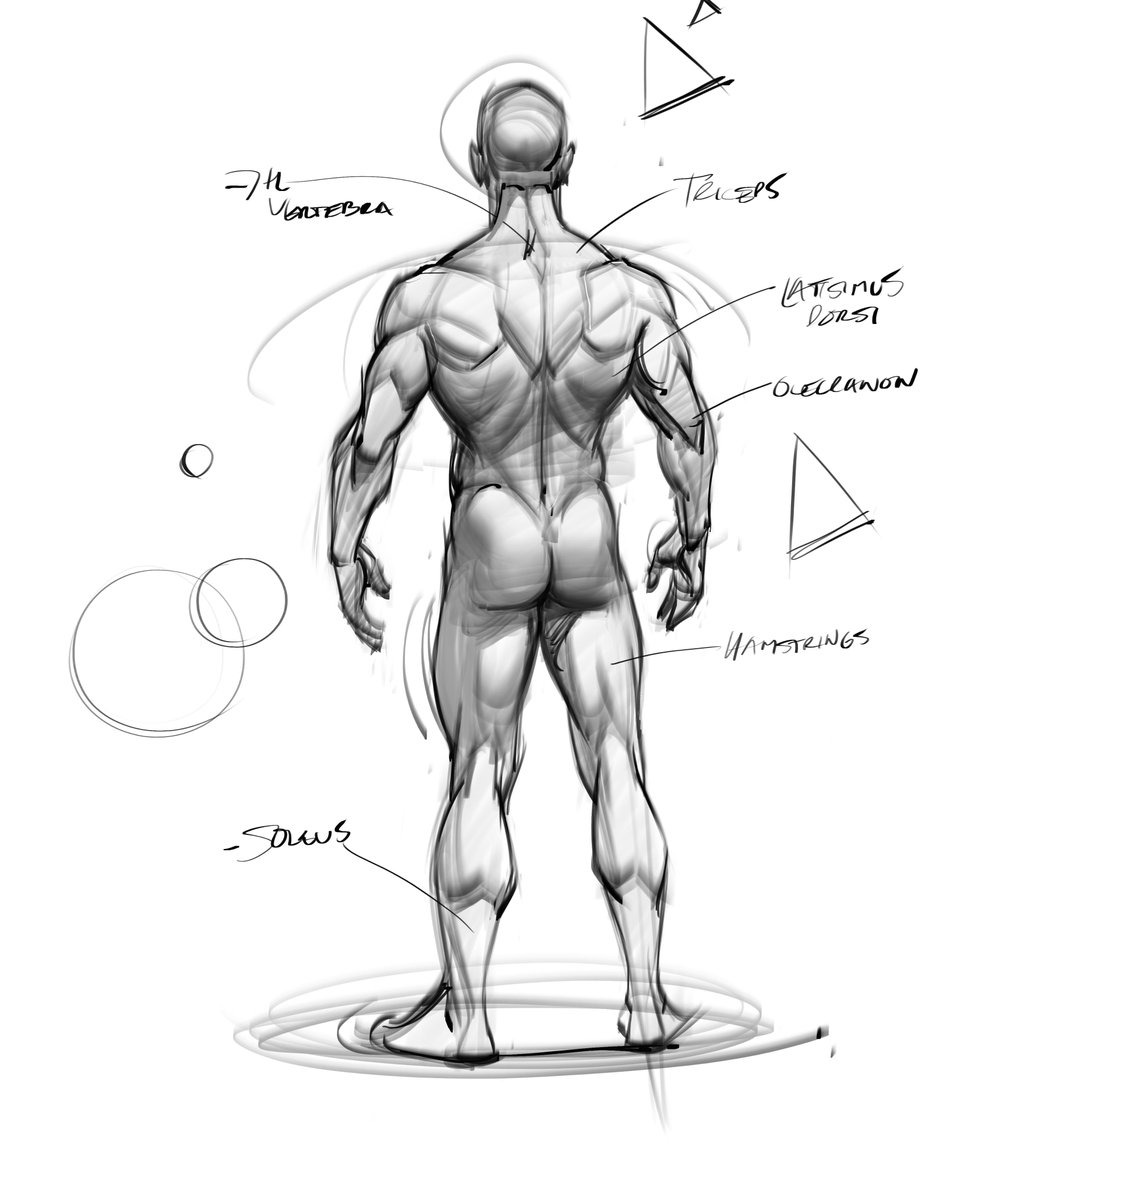 Anatomy sketch of the back muscles! #muscles #back #drawing #gesturedrawing #figuredrawing #trapezius #latismusdorsi #hamstrings #posteriorchain #soleus #glutes #humananatomy #gottogetbetter #art #shading